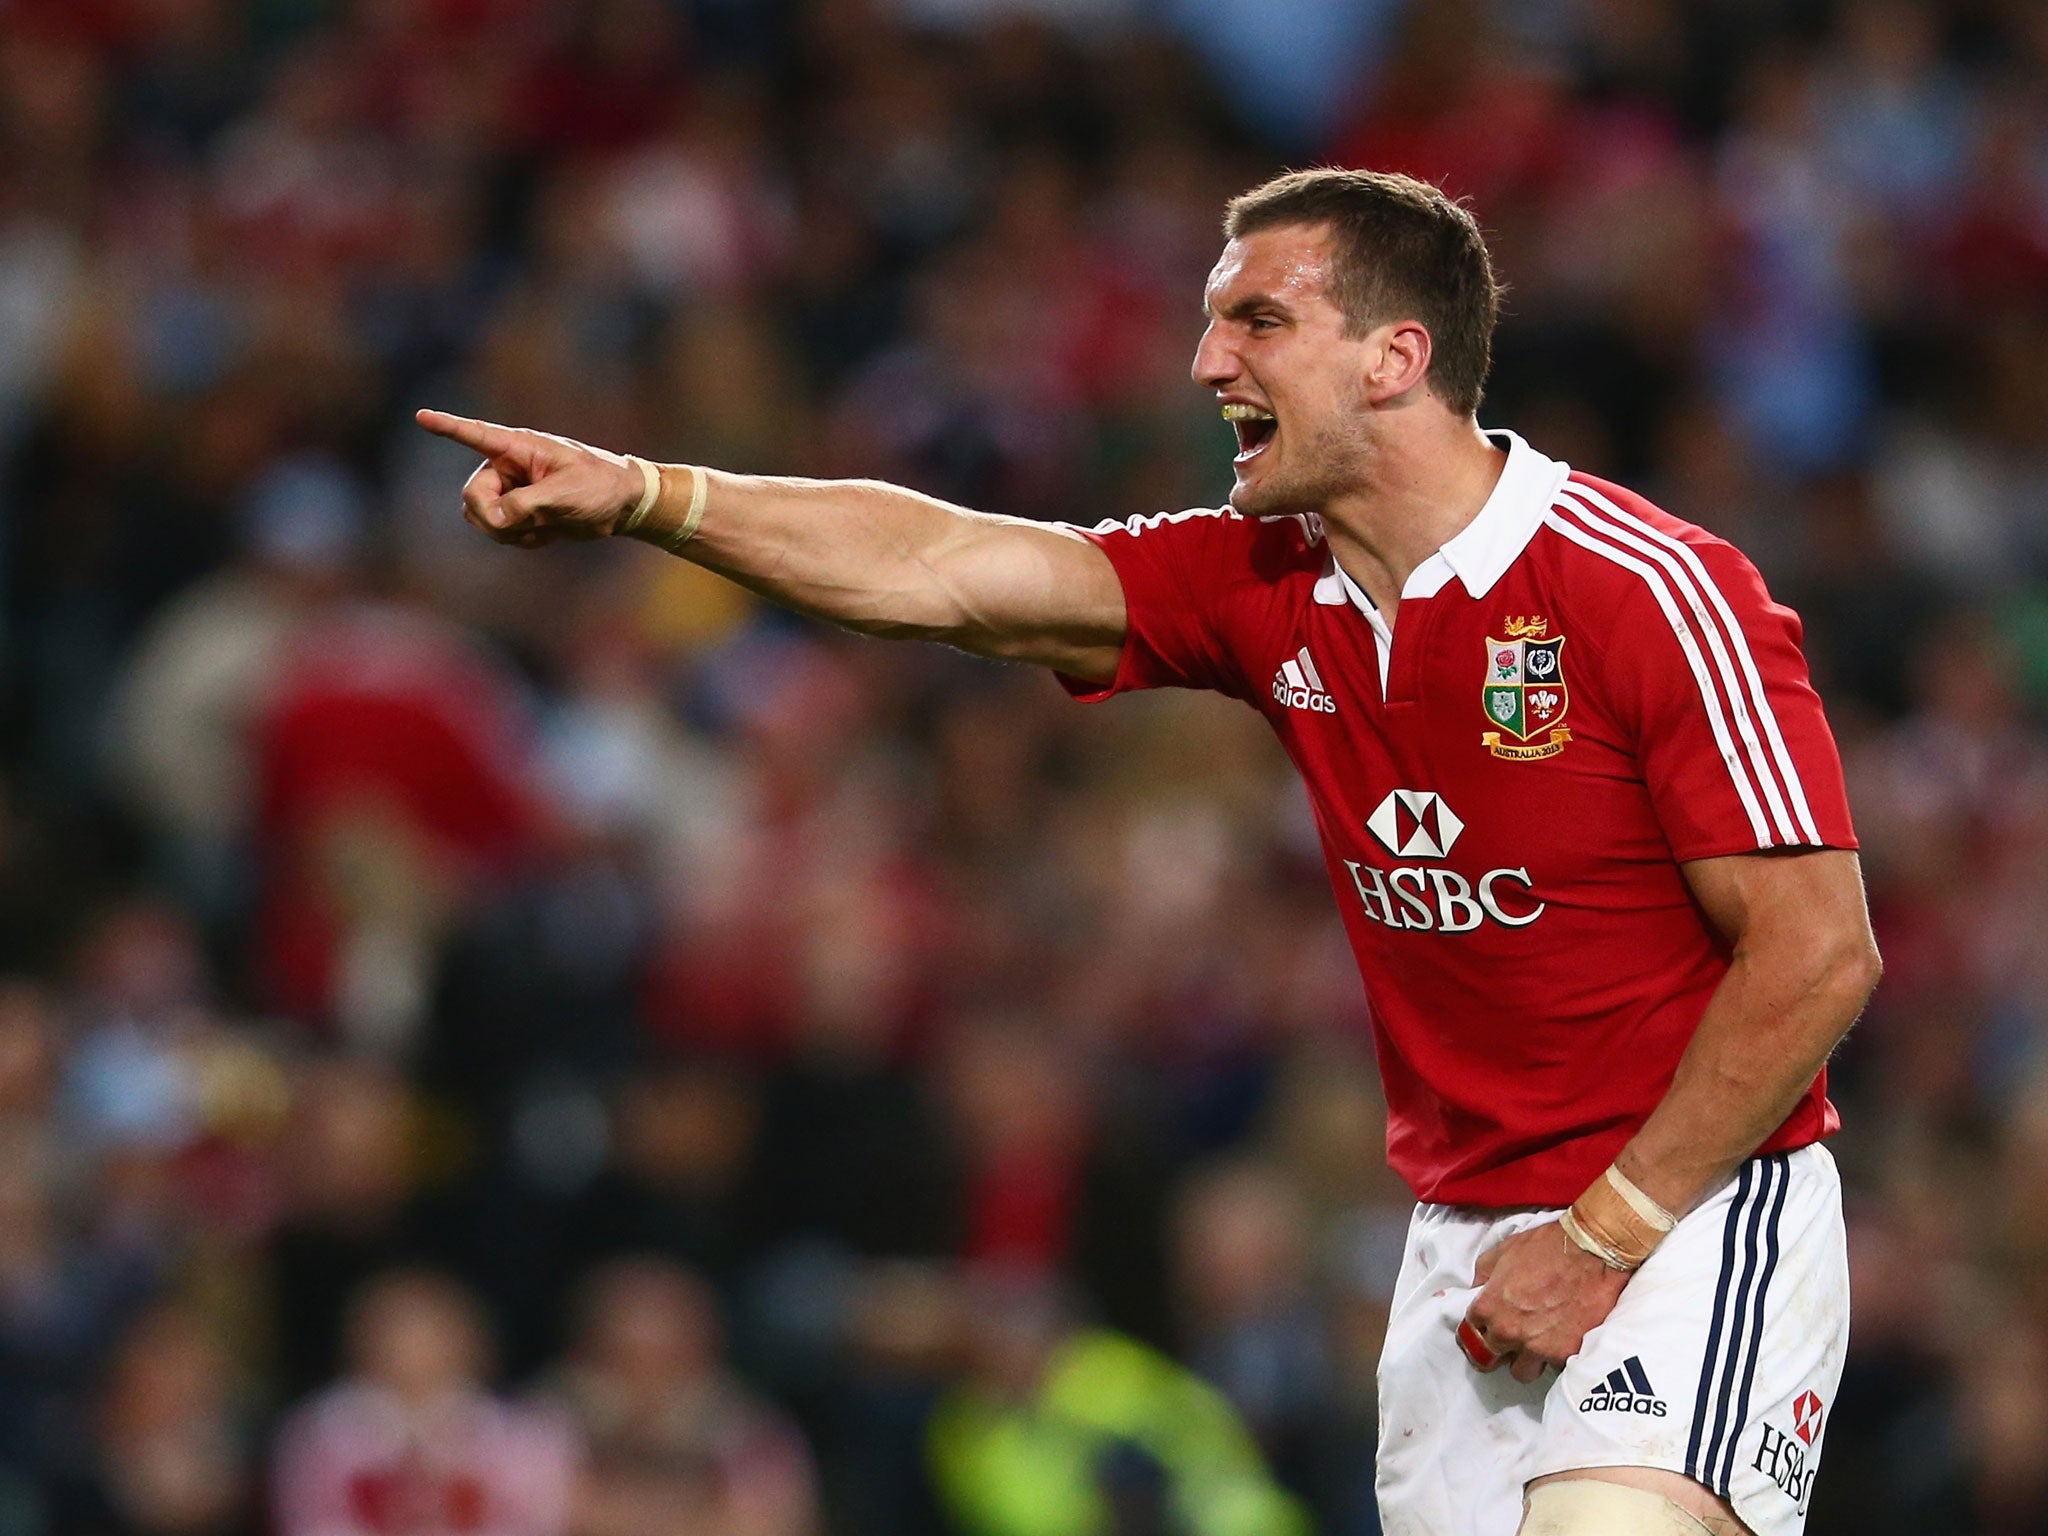 Sam Warburton was picked in part for his affinity with referees